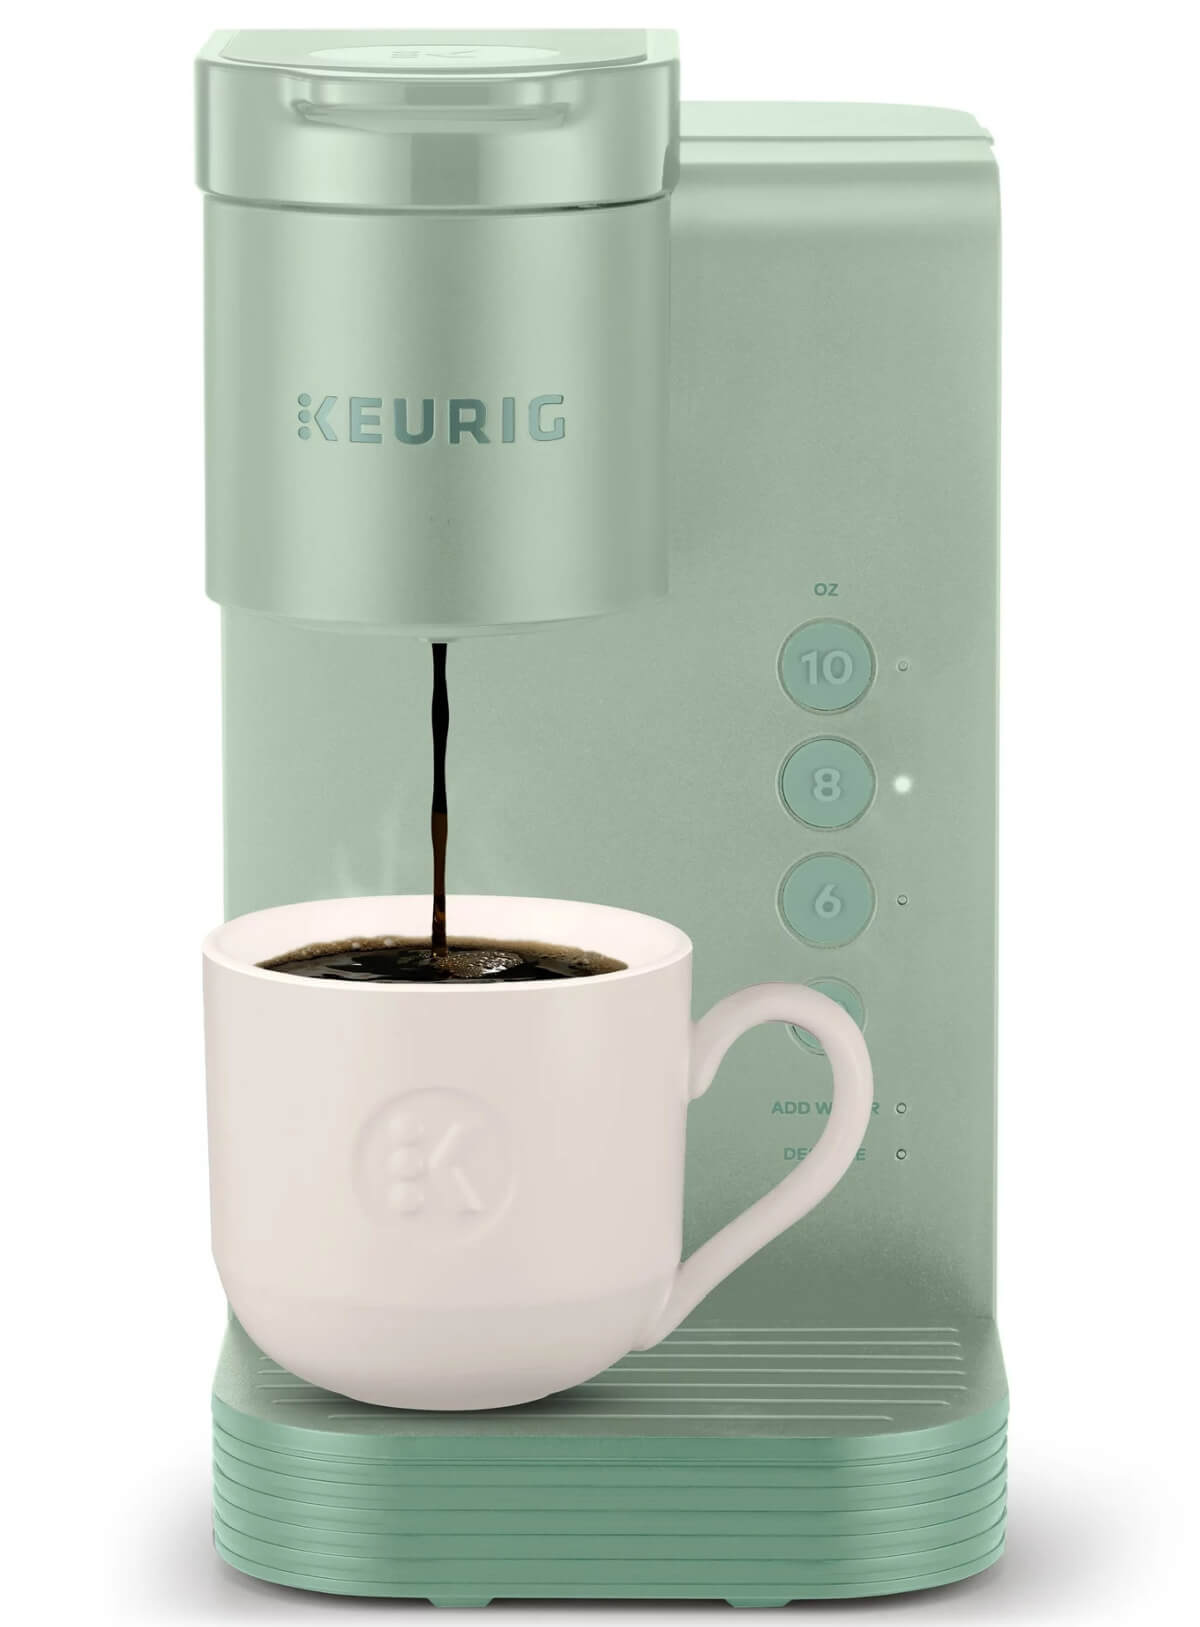 The Keurig in Sage that I ordered from Walmart.com